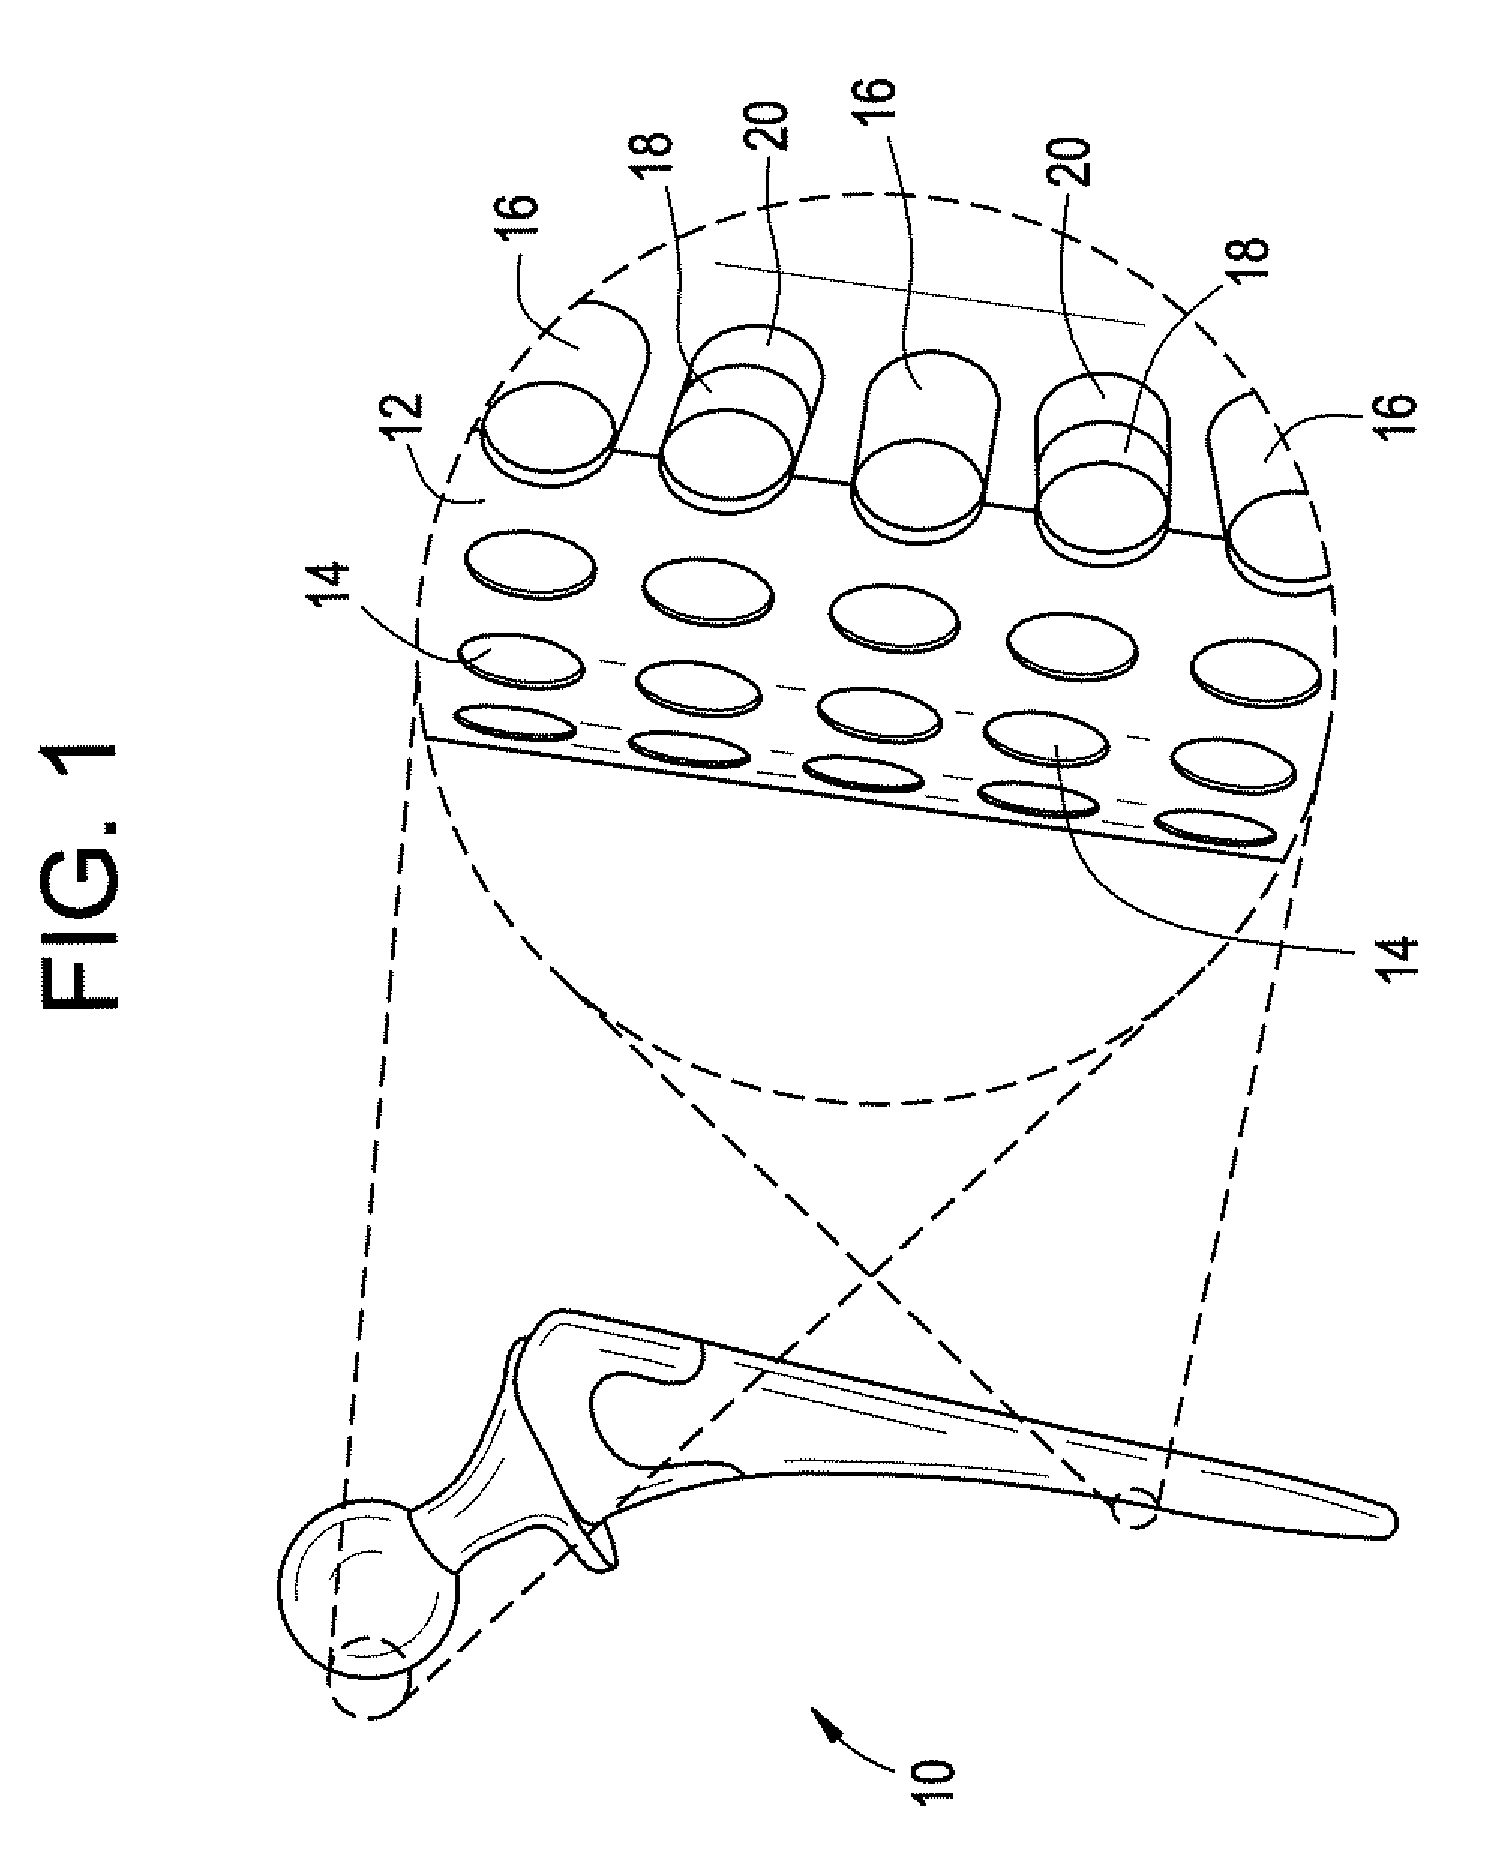 Medical and dental implant devices for controlled drug delivery